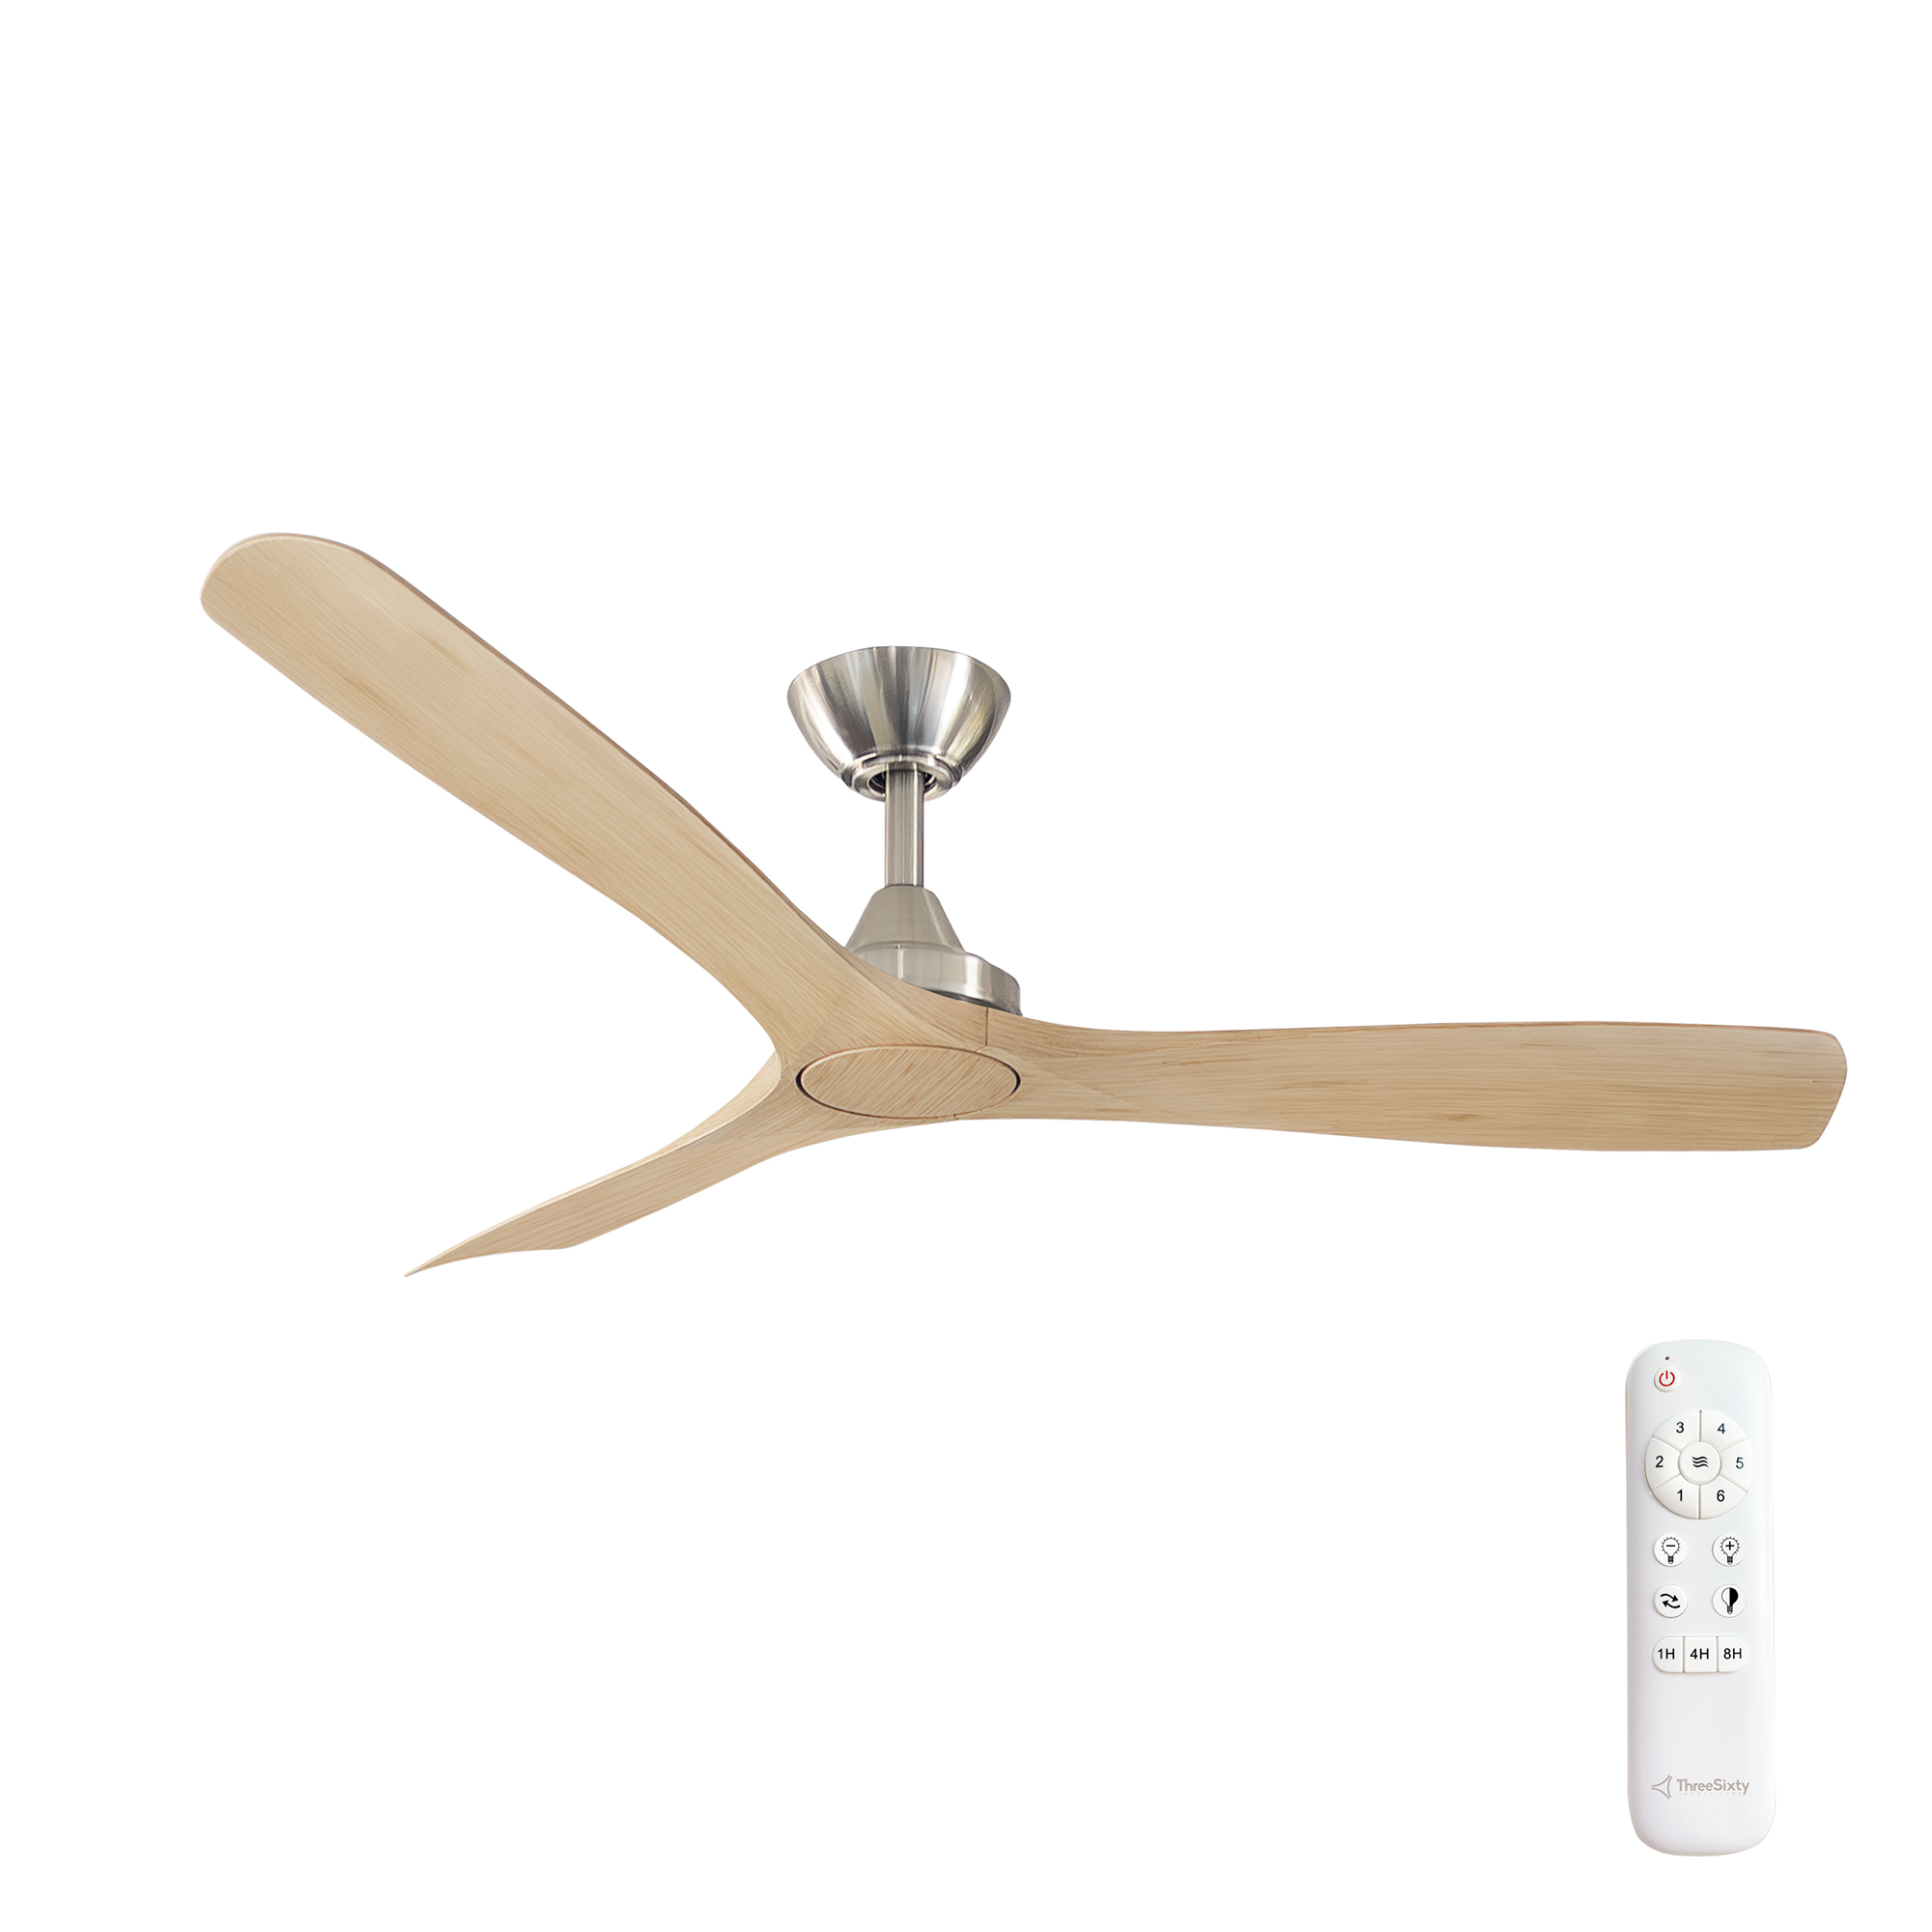 52" Spitfire DC Ceiling Fan in Brushed Nickel with Natural blades